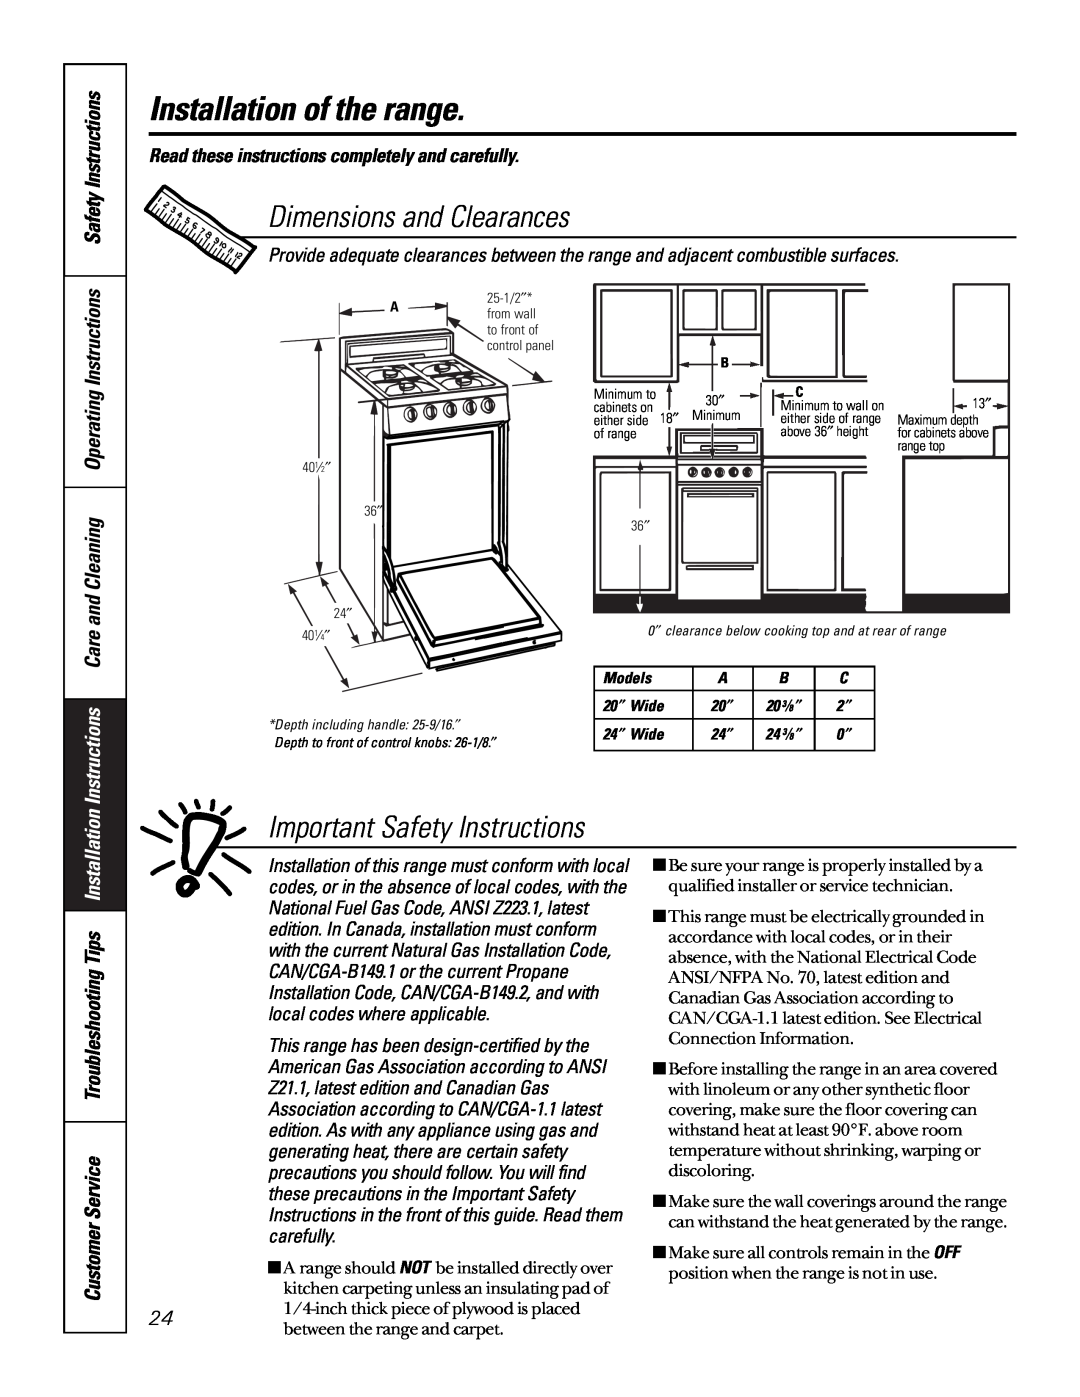 GE 164D3333P185-1 Dimensions and Clearances, Important Safety Instructions, Instructions Care, Installation of the range 